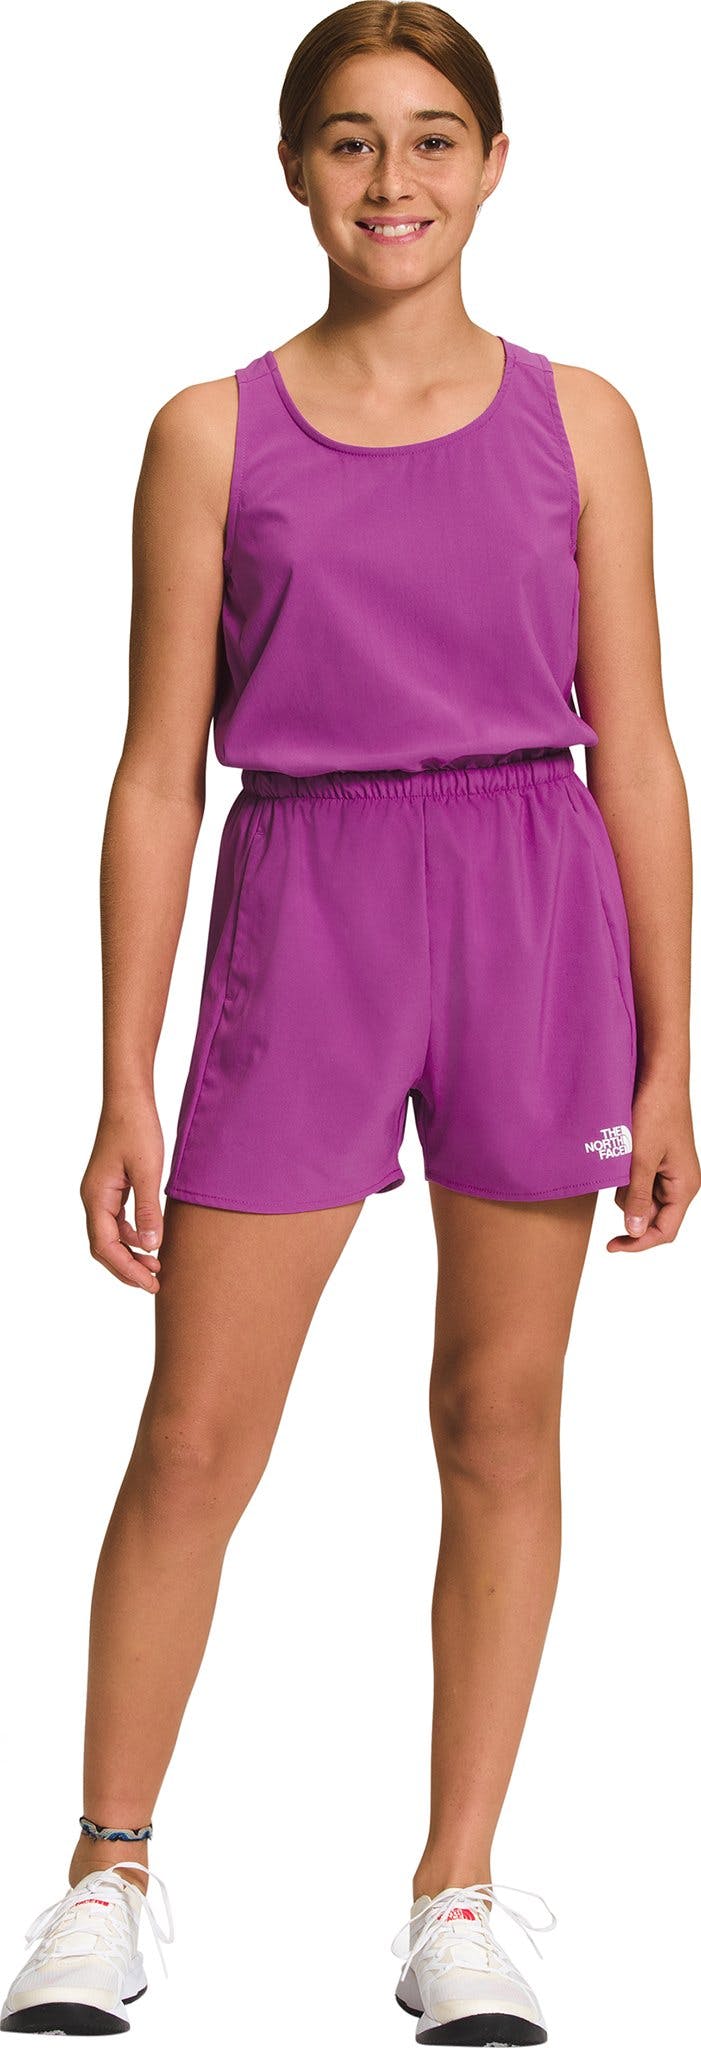 Product image for Amphibious Romper - Girls